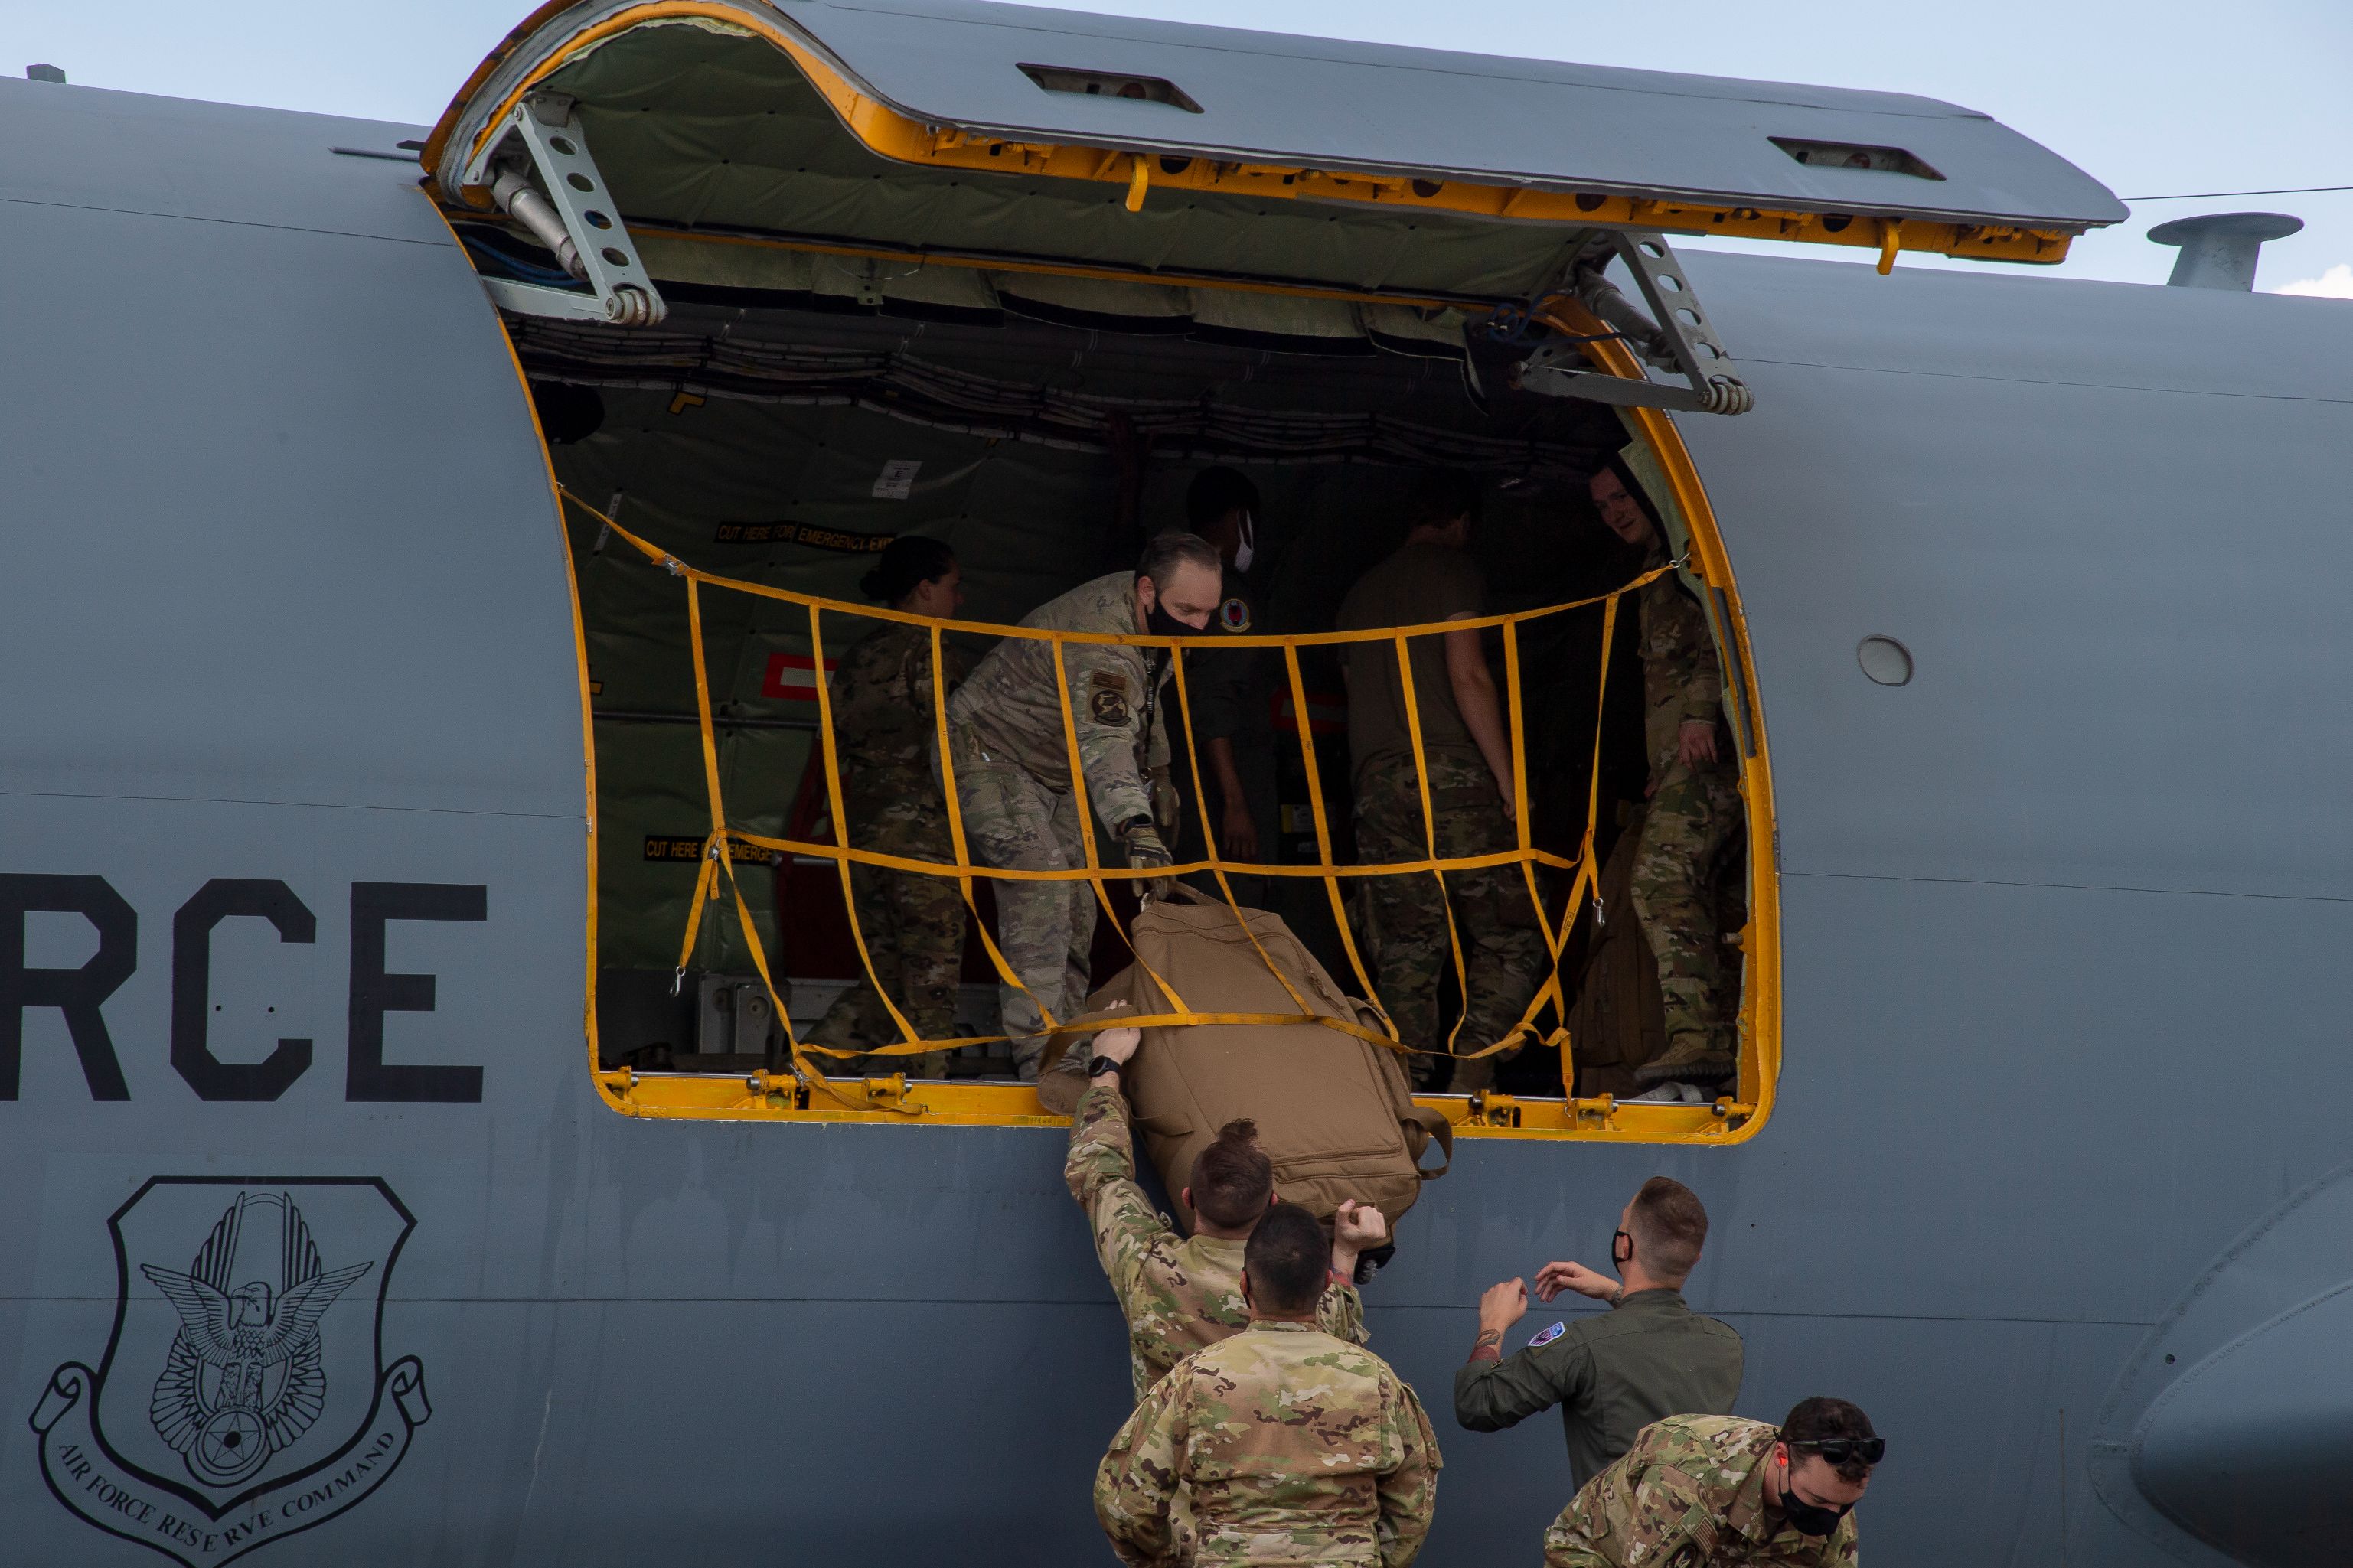 Airmen from the 91st Air Refueling Squadron (ARS) unload a KC-135 Stratotanker aircraft at MacDill Air Force Base, Florida, Sept. 8, 2021. The 91st ARS returned home after completing a deployment in the U.S. Central Command area of responsibility. (U.S. Air Force photo by Airman 1st Class Hiram Martinez)